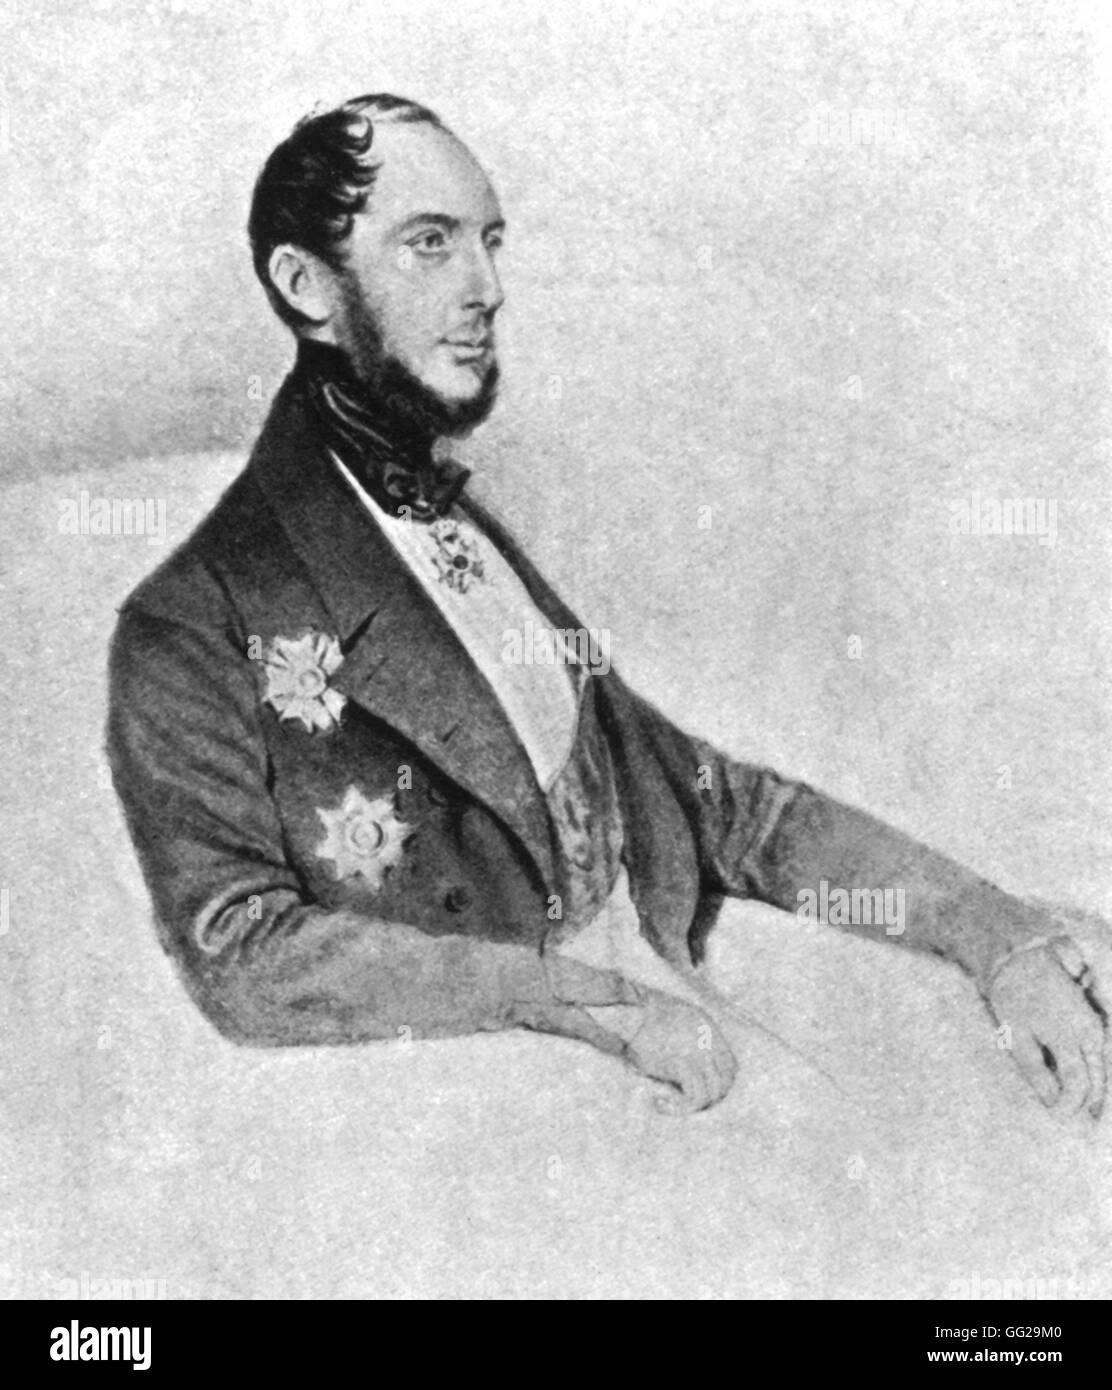 Alexander Pushkin's life (1799-1837) Baron van Heeckeren, adoptive father of Georges van Anthes (who killed Pushkin during a duel) 19th century Russia Stock Photo